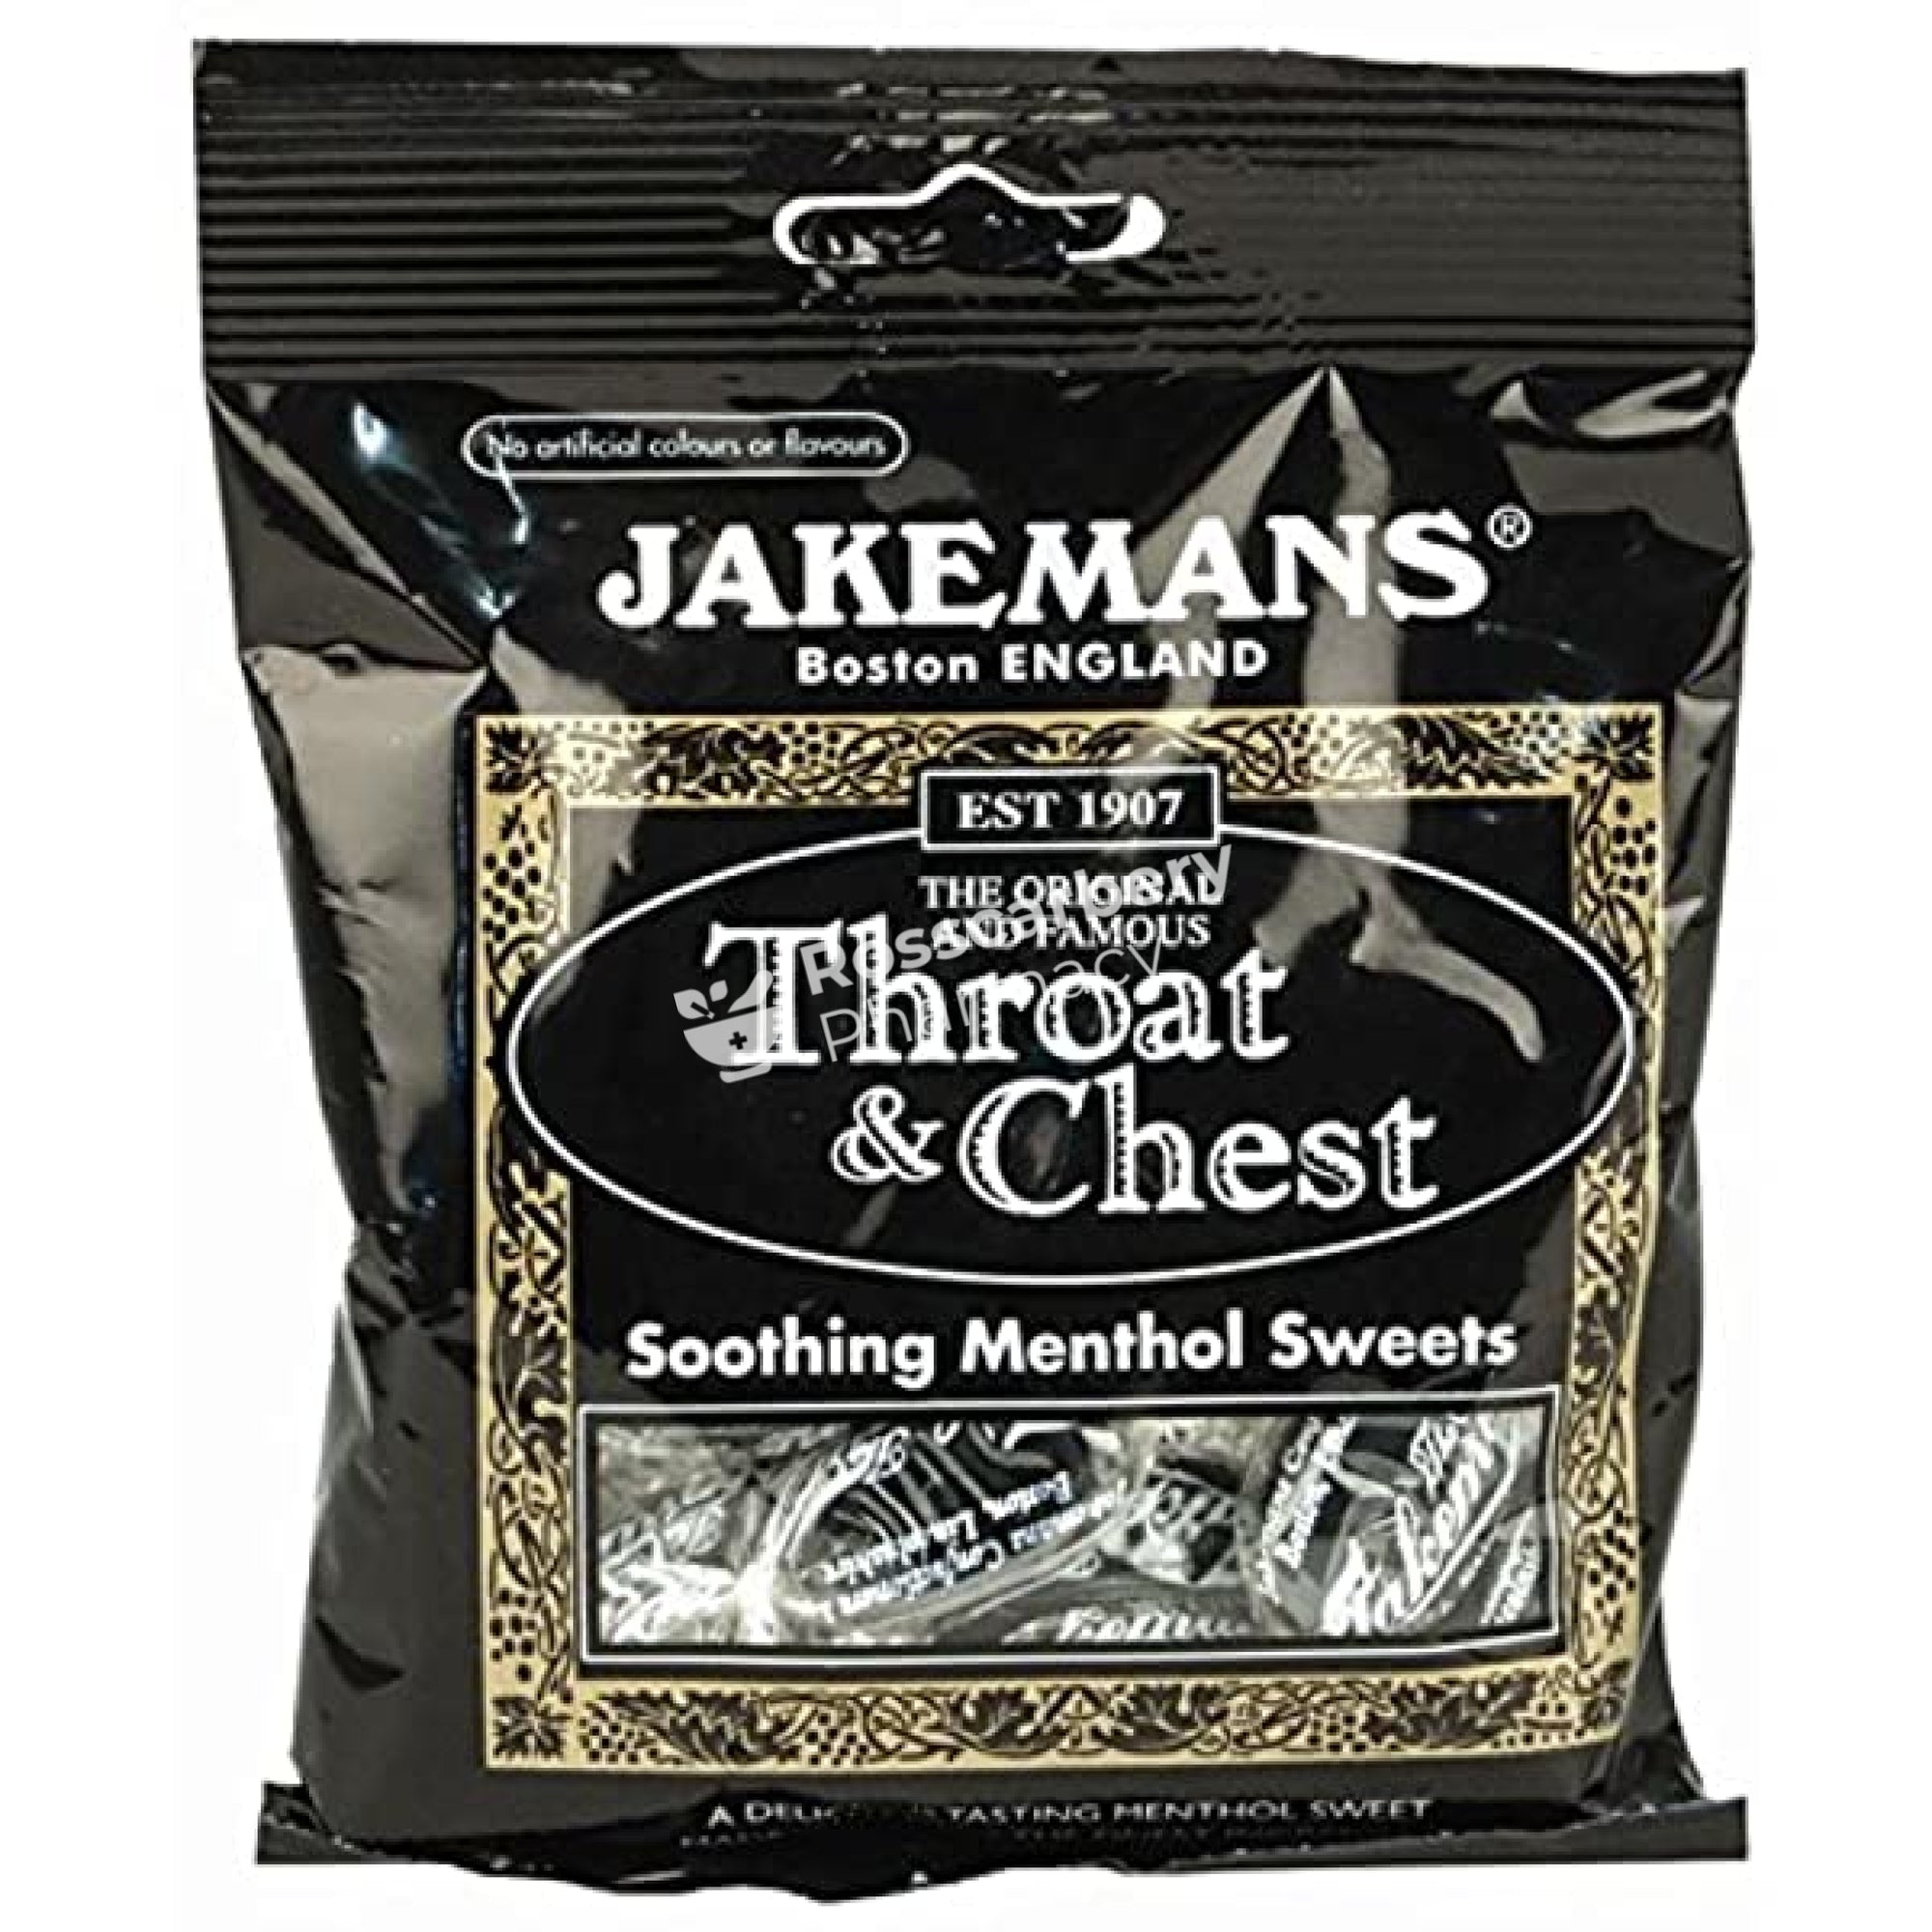 Jakemans Throat & Chest - Soothing Menthol Sweets Sweets/lozenges/pastilles